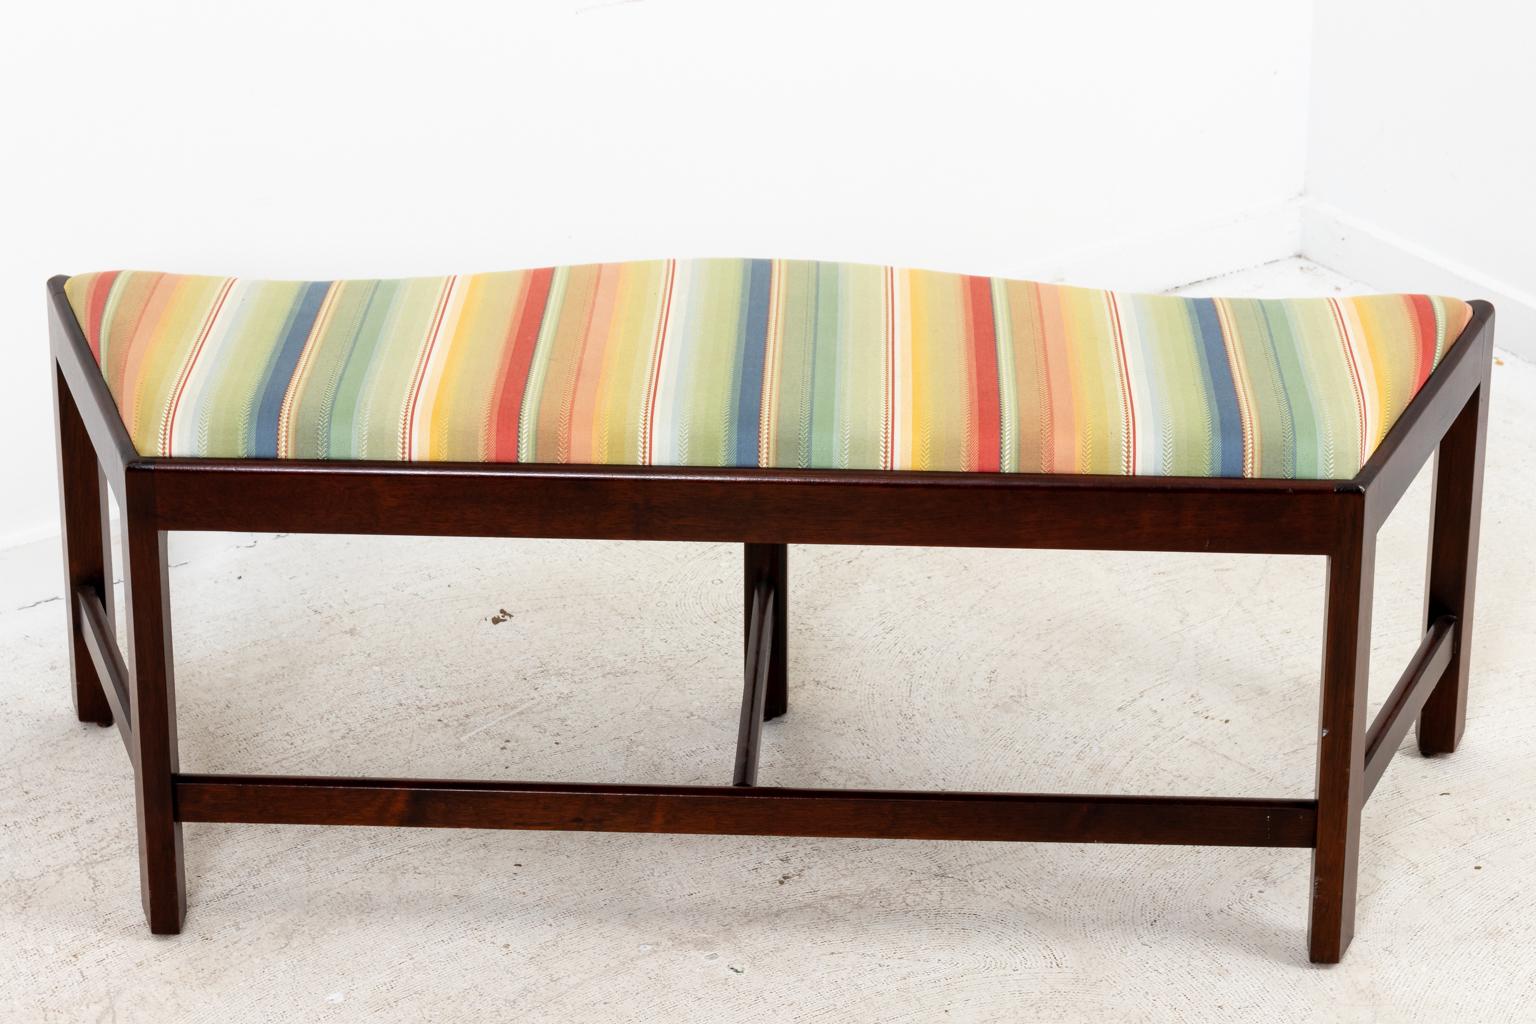 Circa 1970-1980s upholstered window bench in the Mid-Century Modern style with angled sides, curved front, and bottom stretcher. The piece features clean striped upholstery and measures 48.00 Inches across the front and 36.50 Inches across the back